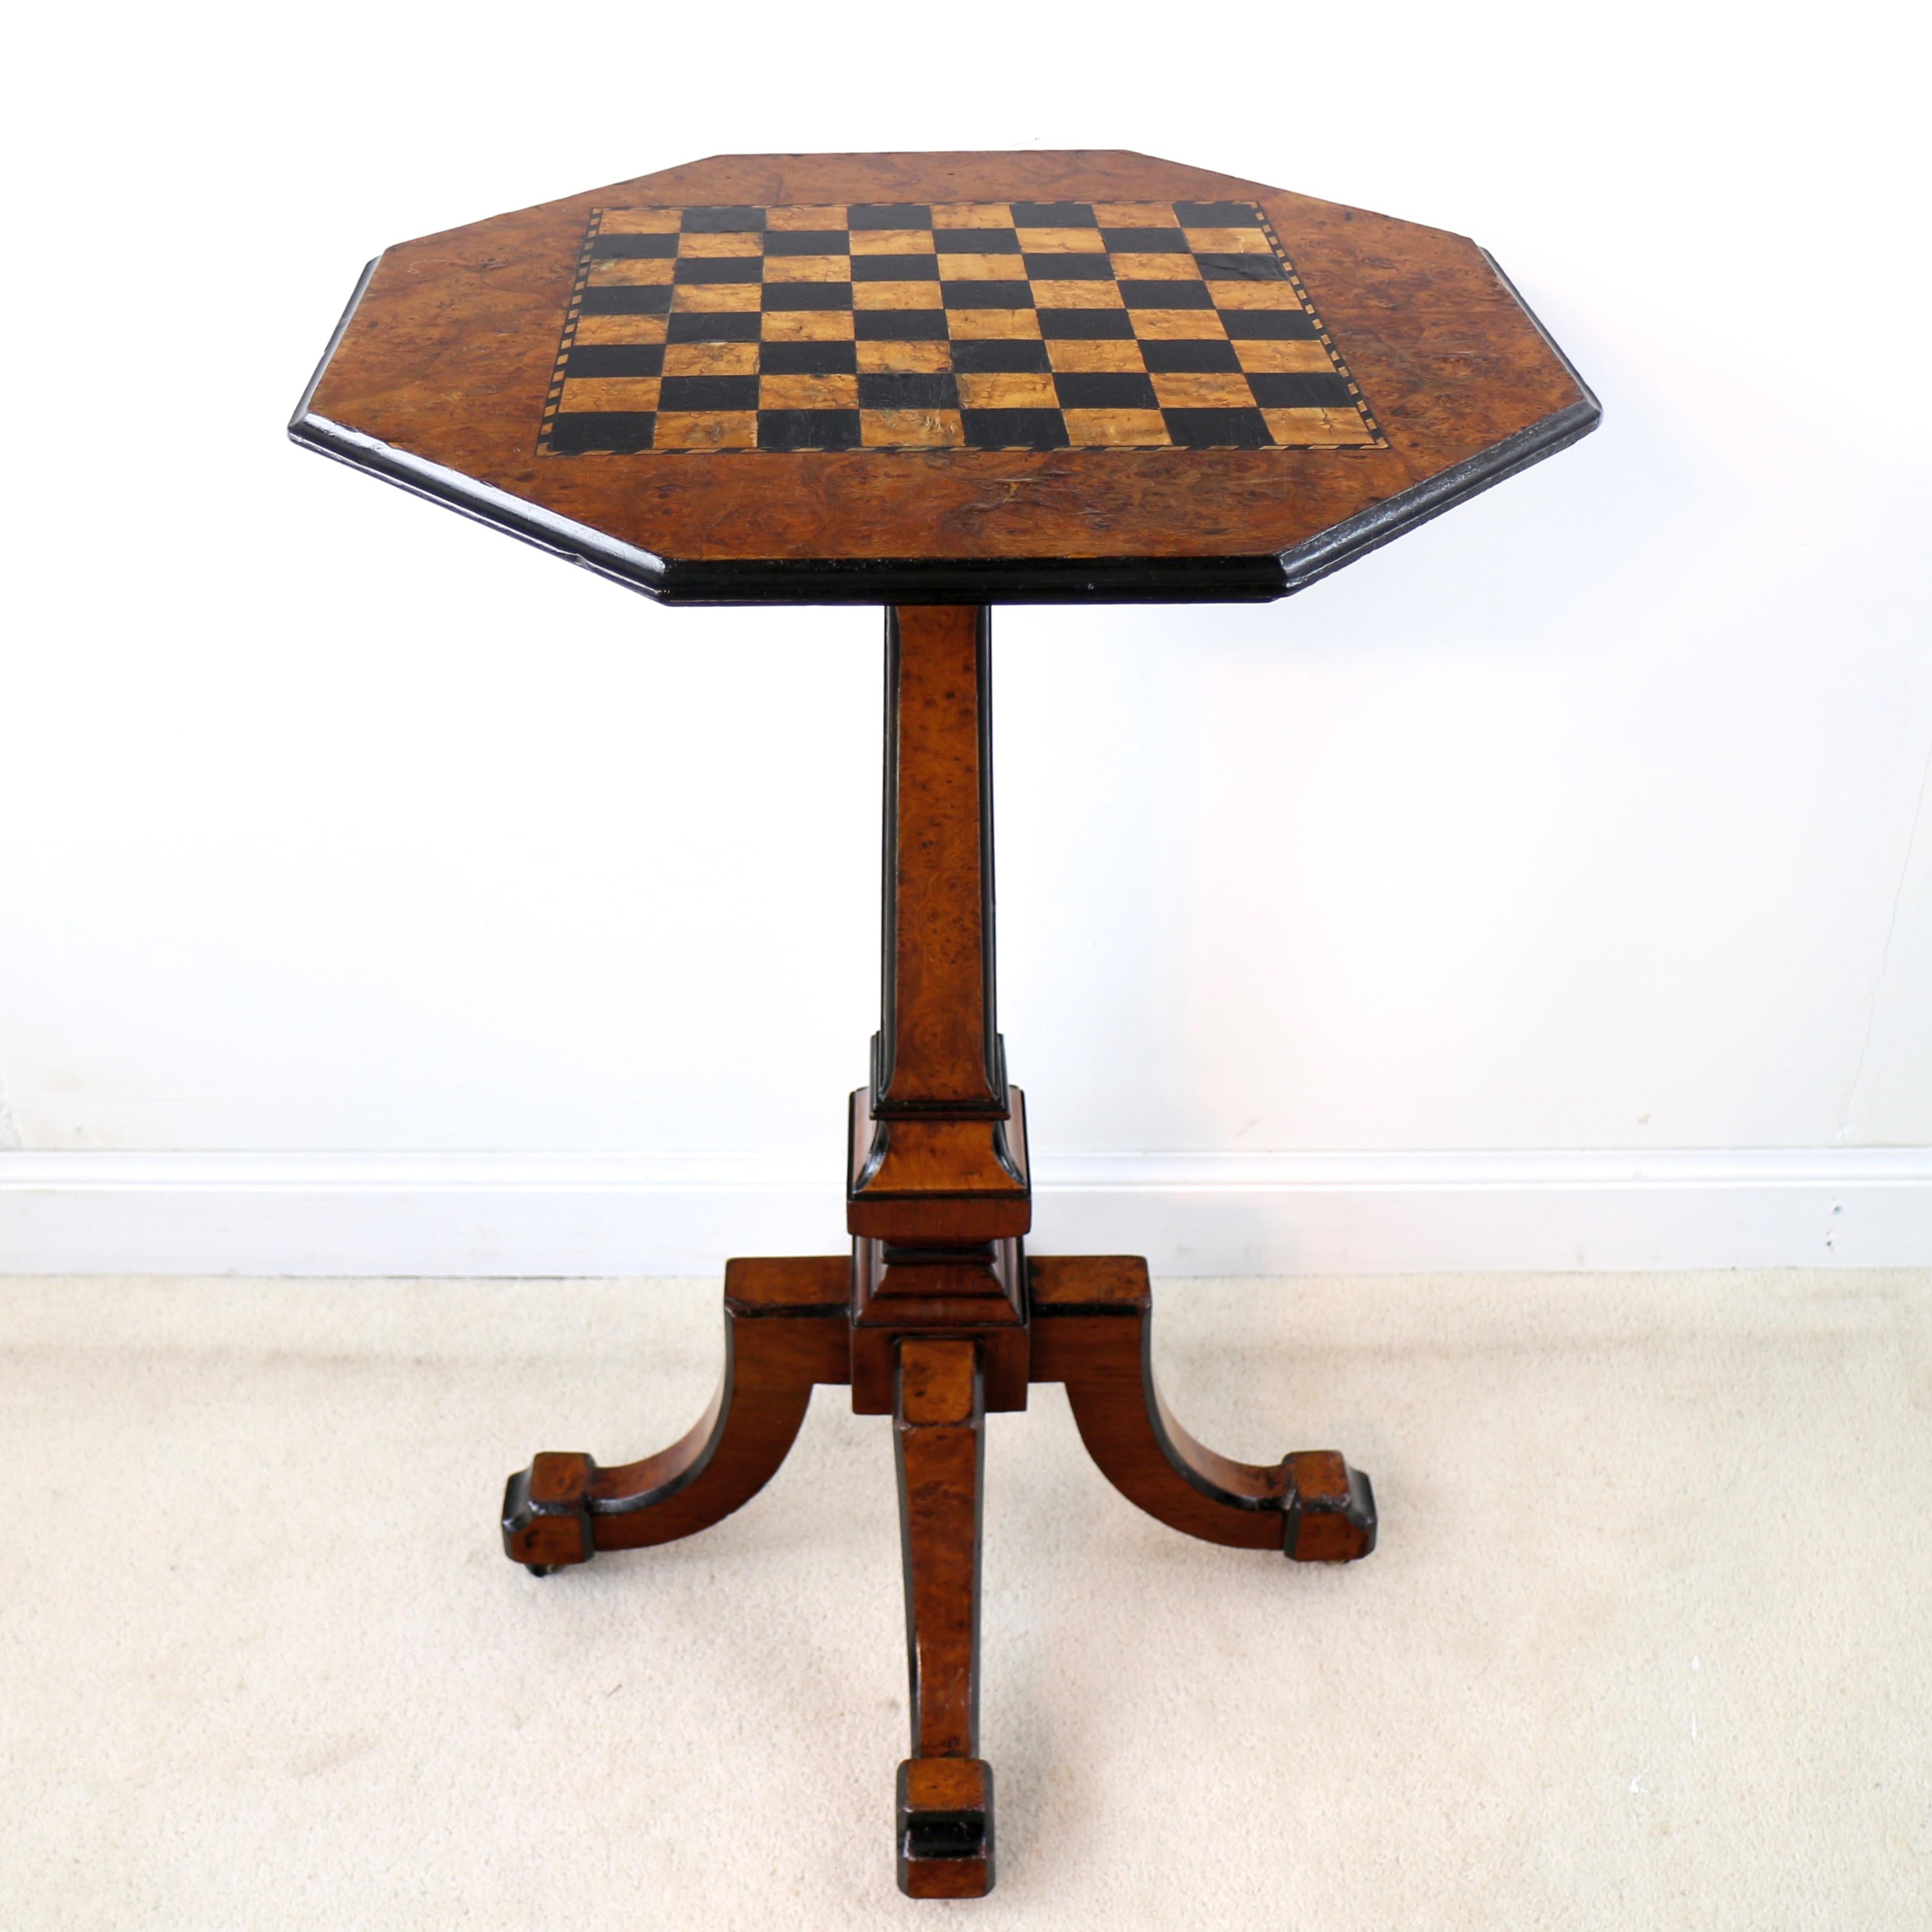 A charming and rare Victorian Irish Killarney yew and ebonised games table, the octagonal shaped top inlaid with birds-eye maple and ebonised squares edged with an arbutus and ebony rope-twist border and ebonised moulded edge, supported on a square